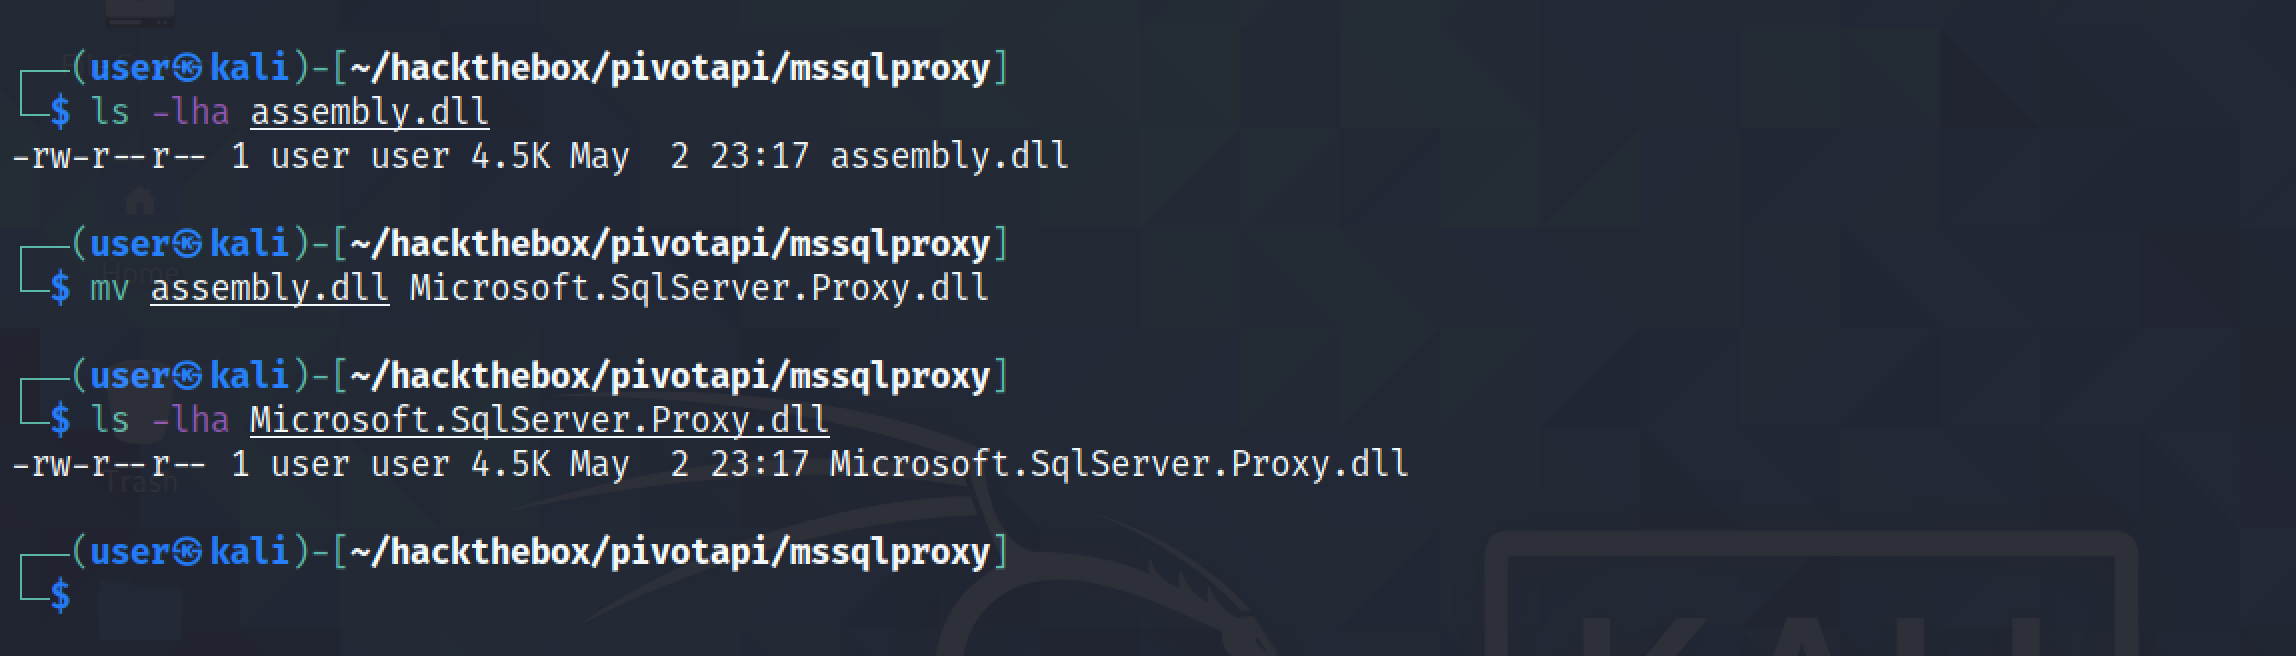 Renaming assembly.dll to Microsoft.SqlServer.Proxy.dll.